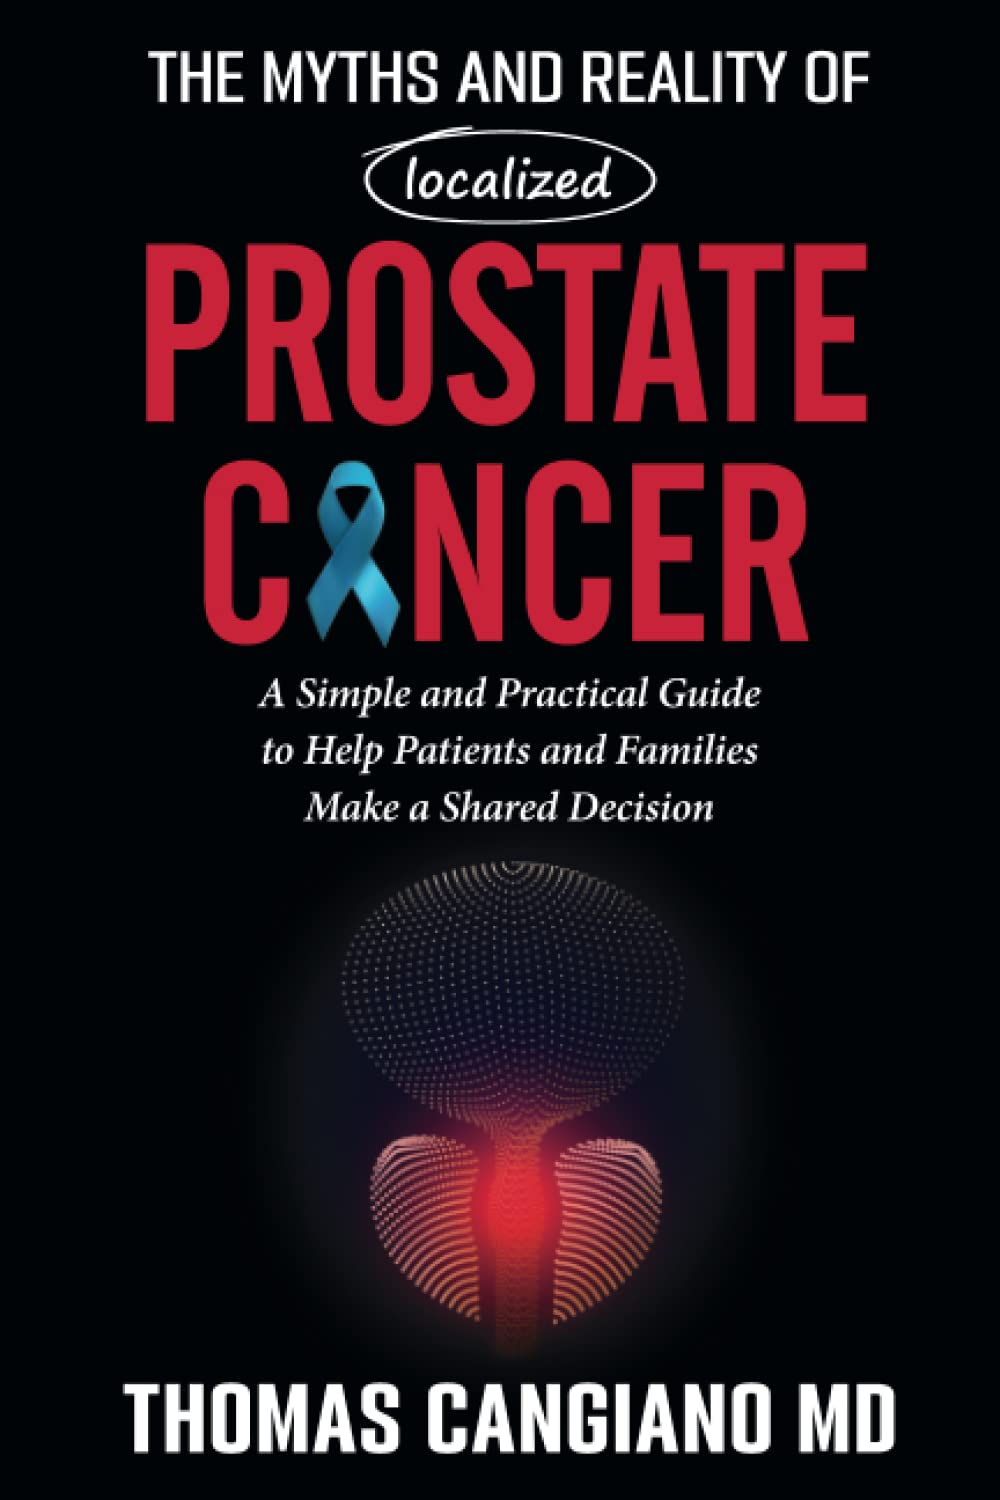 The Myths and Reality of Localized Prostate Cancer: A Simple and Practical Guide to Help Patients and Families Make a Shared Decision